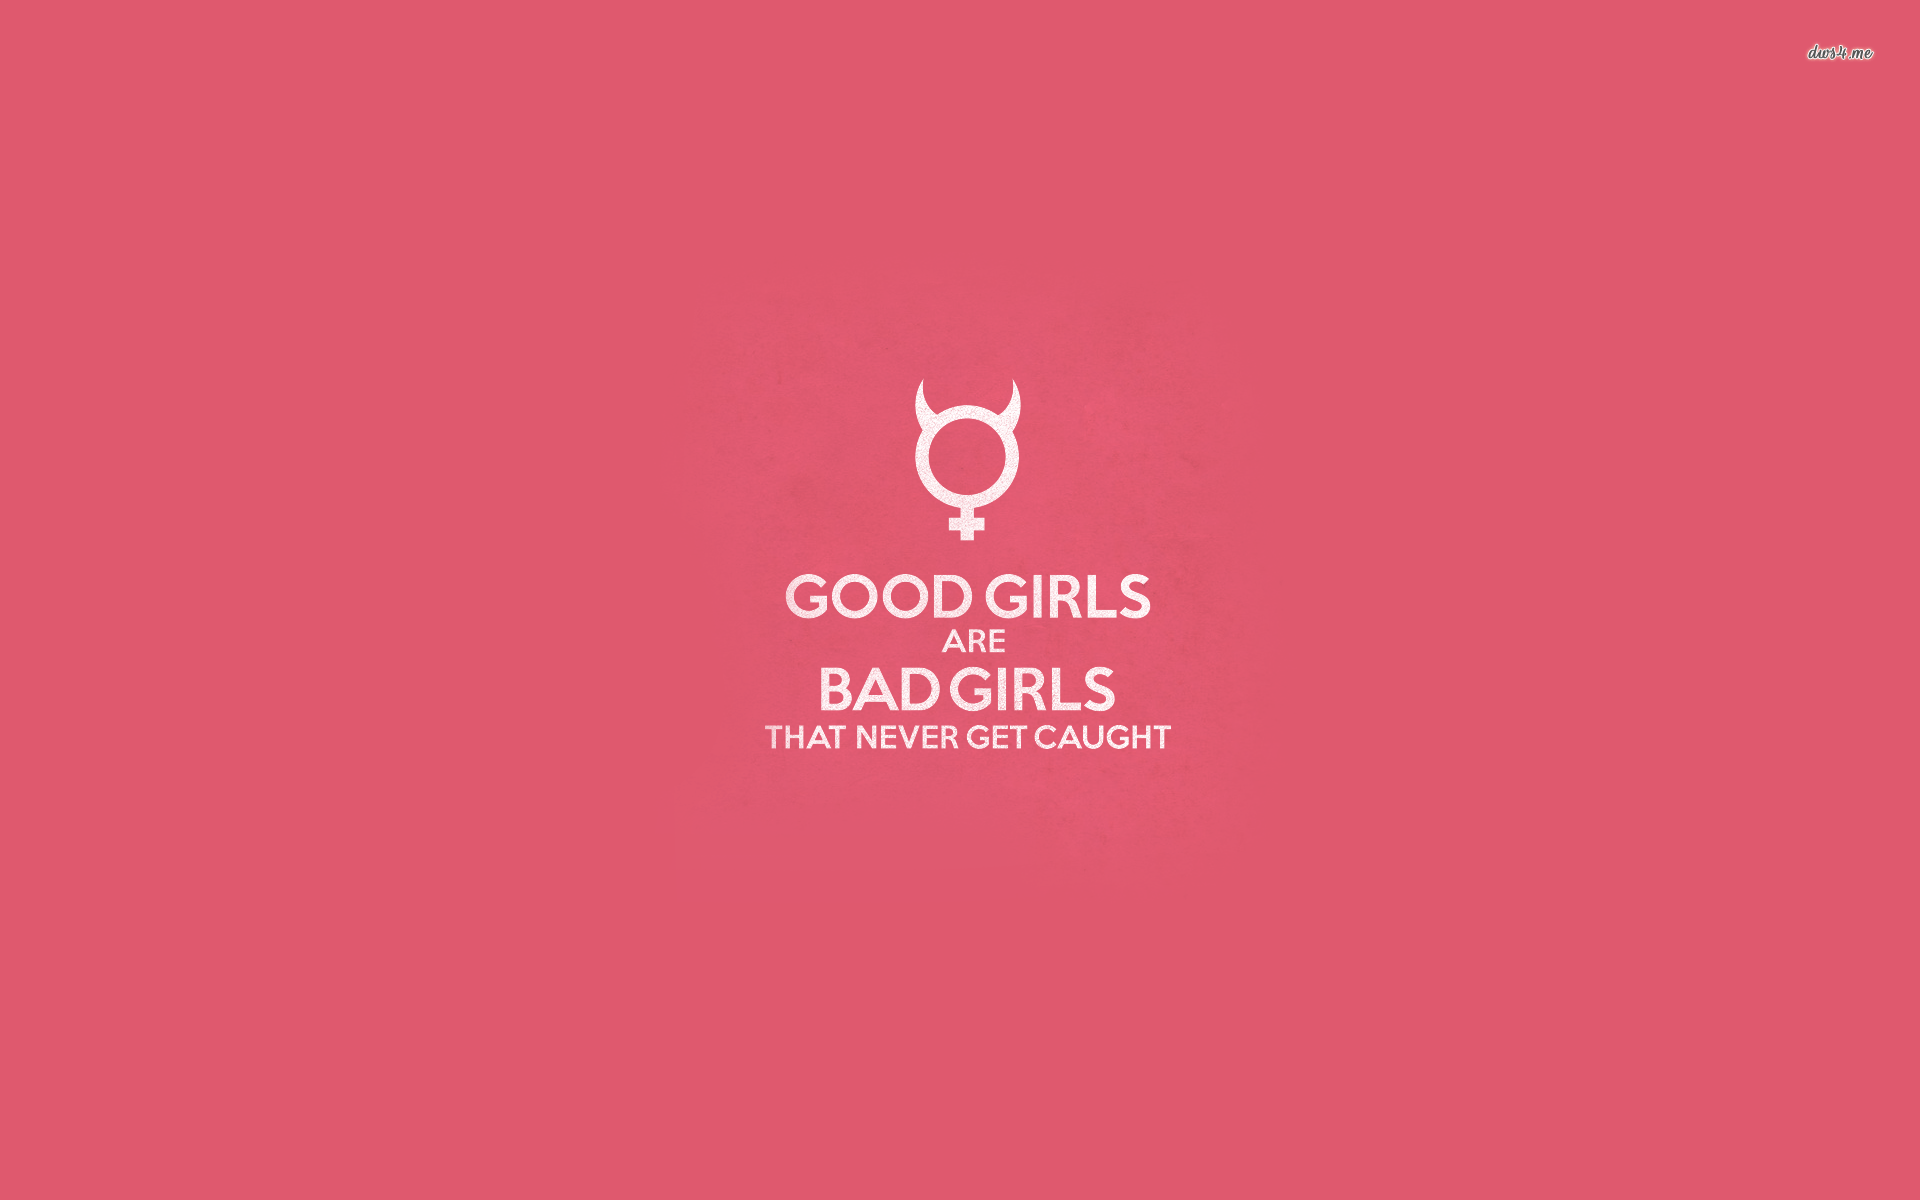 Bad Girl Aesthetic Laptop Wallpapers Wallpaper Cave These images are high quality, compatible with any laptop, and super vsco worthy. bad girl aesthetic laptop wallpapers